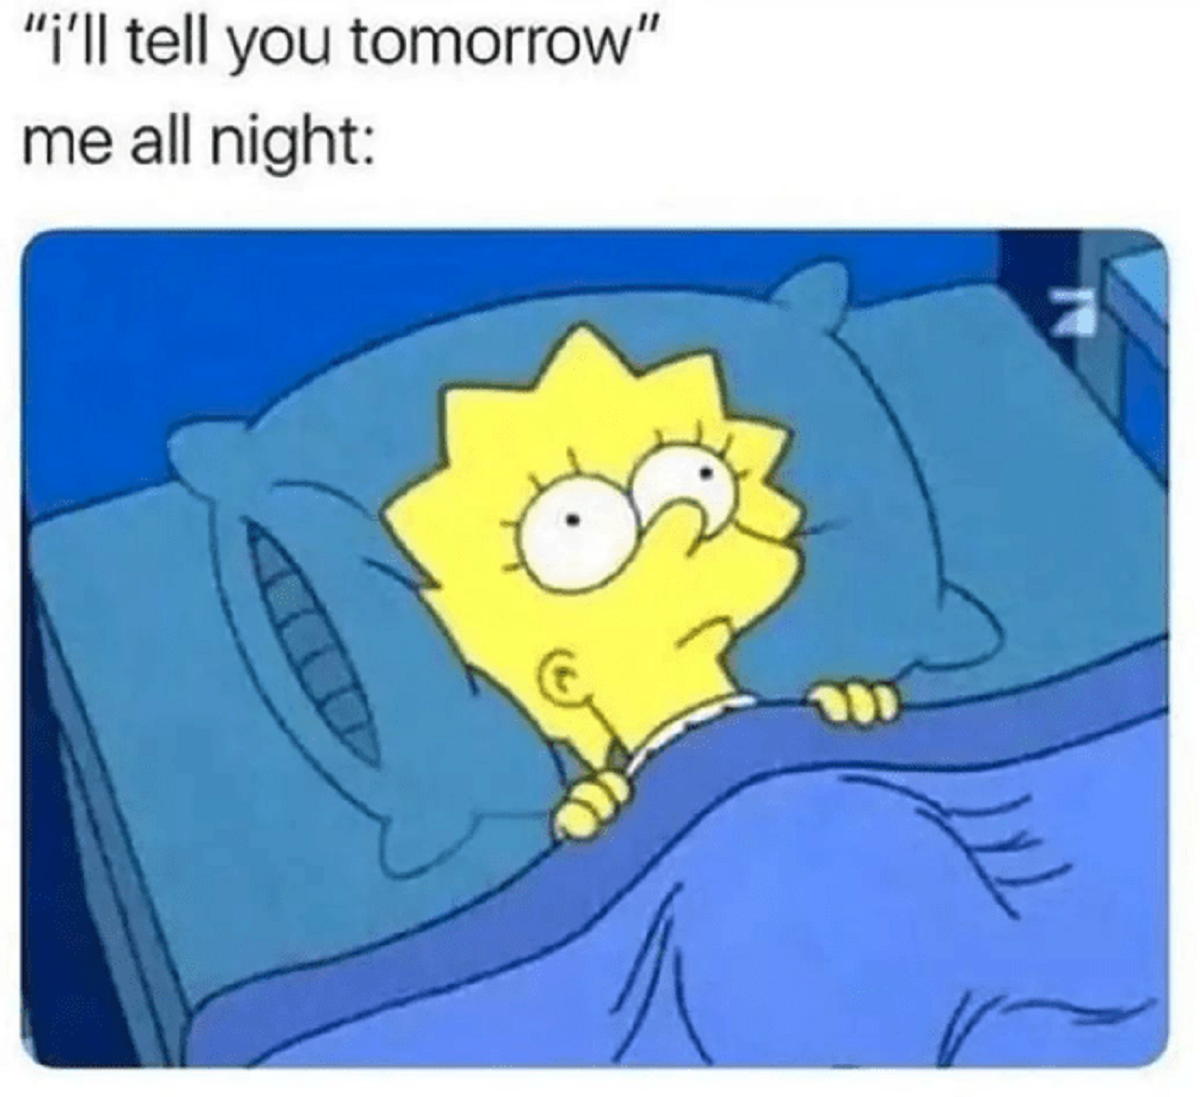 42 Funny Self-Deprecating Memes the Ask the Question 'Why Me?' 